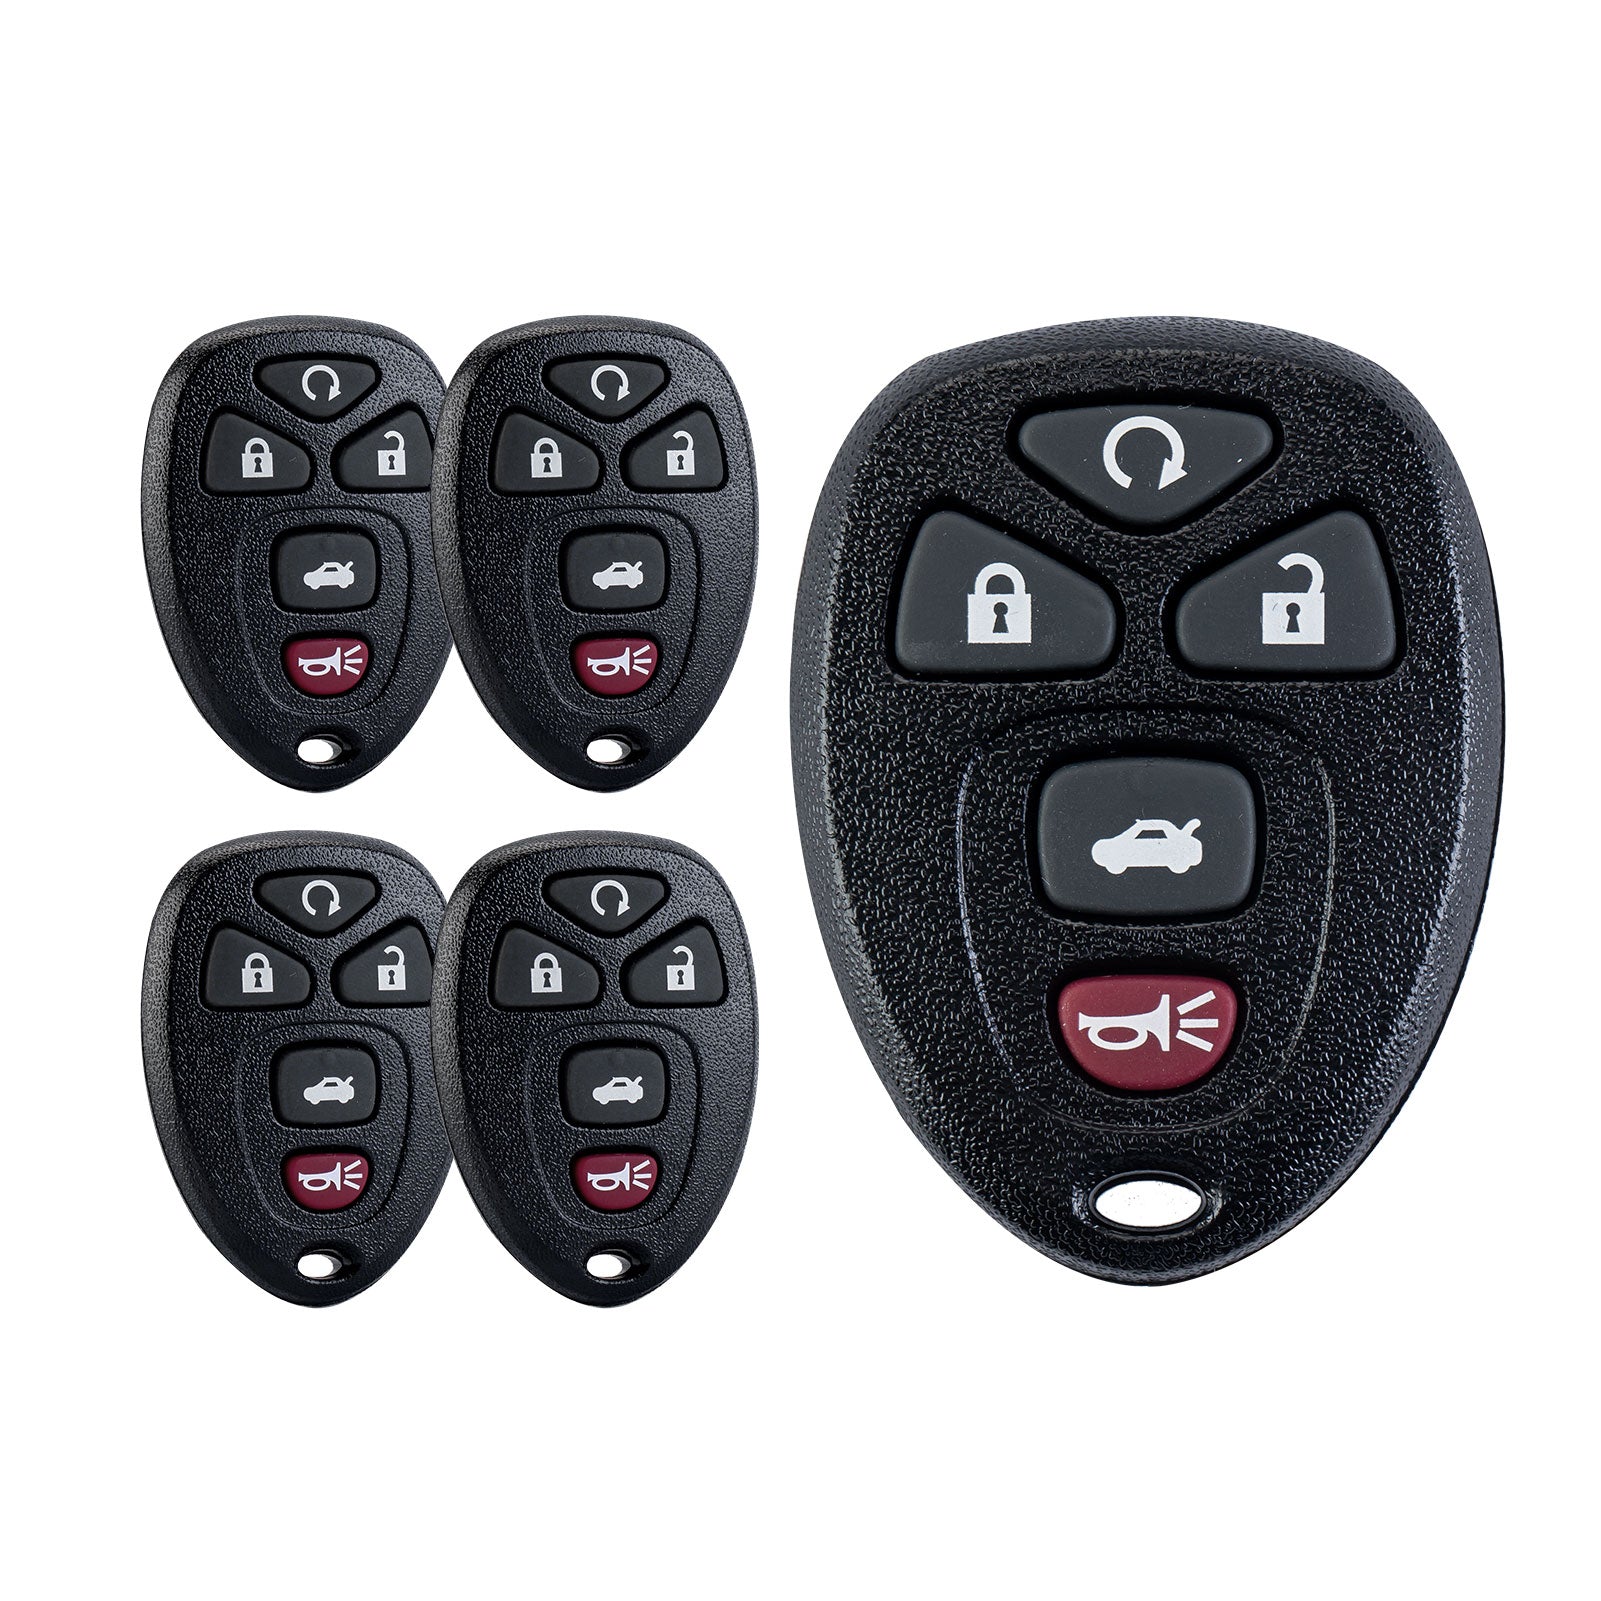 5 Button Keyless Entry Cotrol Replacement for Malibu Cobalt G5 G6 Grand Prix Lacrosse Allure 22733524 KOBGT04A